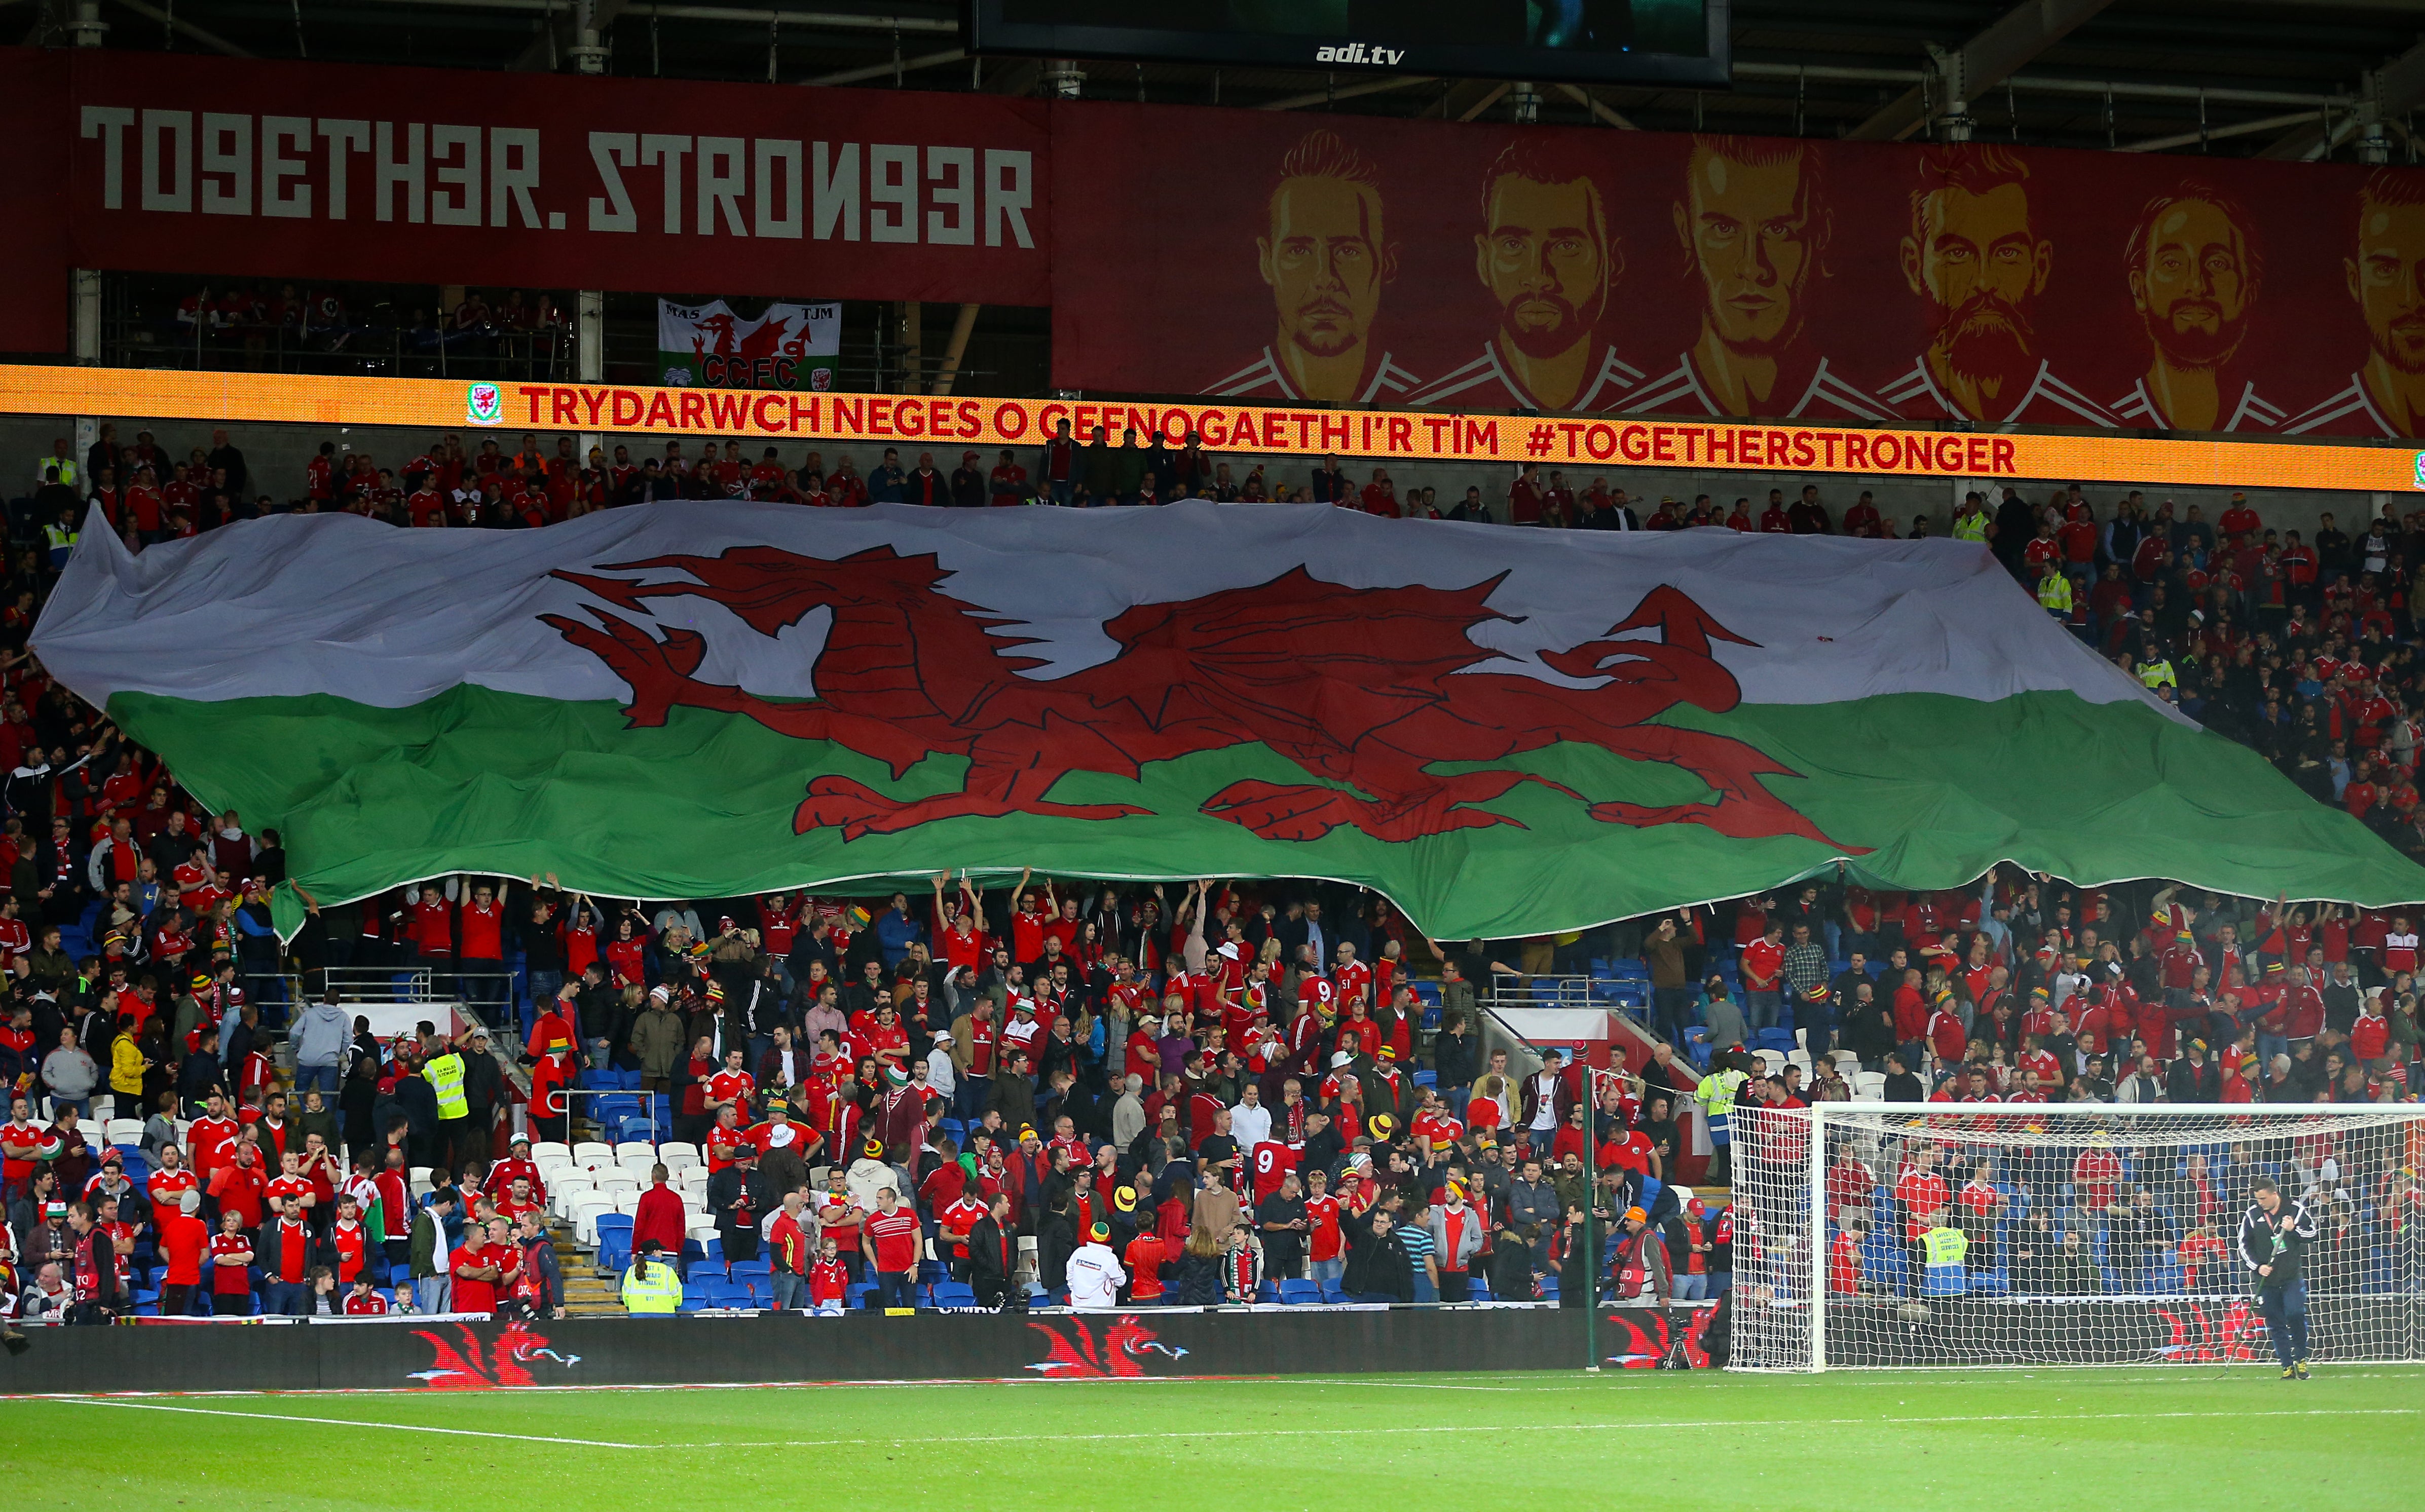 Wales fans from the South Asian community will be at the Cardiff City Stadium on Wednesday for the World Cup qualifier against Estonia (Nigel French/PA)